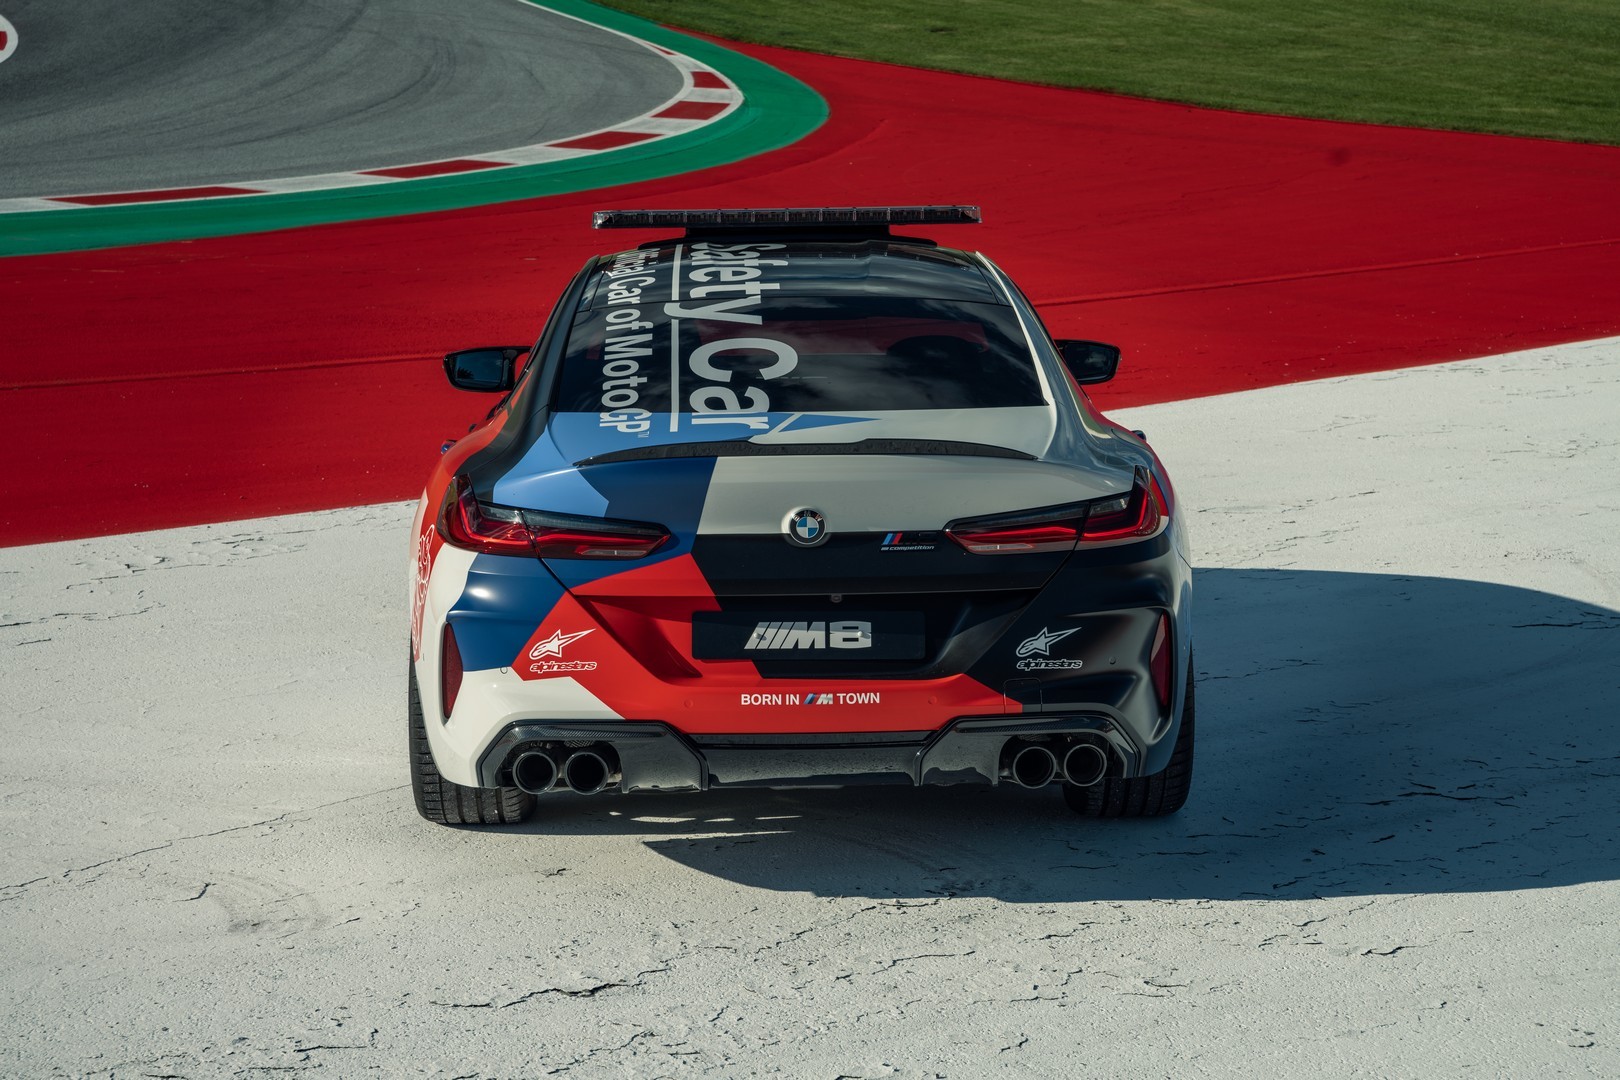 2019 - [BMW] Série 8 Gran Coupé [G16] - Page 7 Bmw-surprisingly-turned-the-new-m8-gran-coupe-into-a-safety-car-for-motogp_5